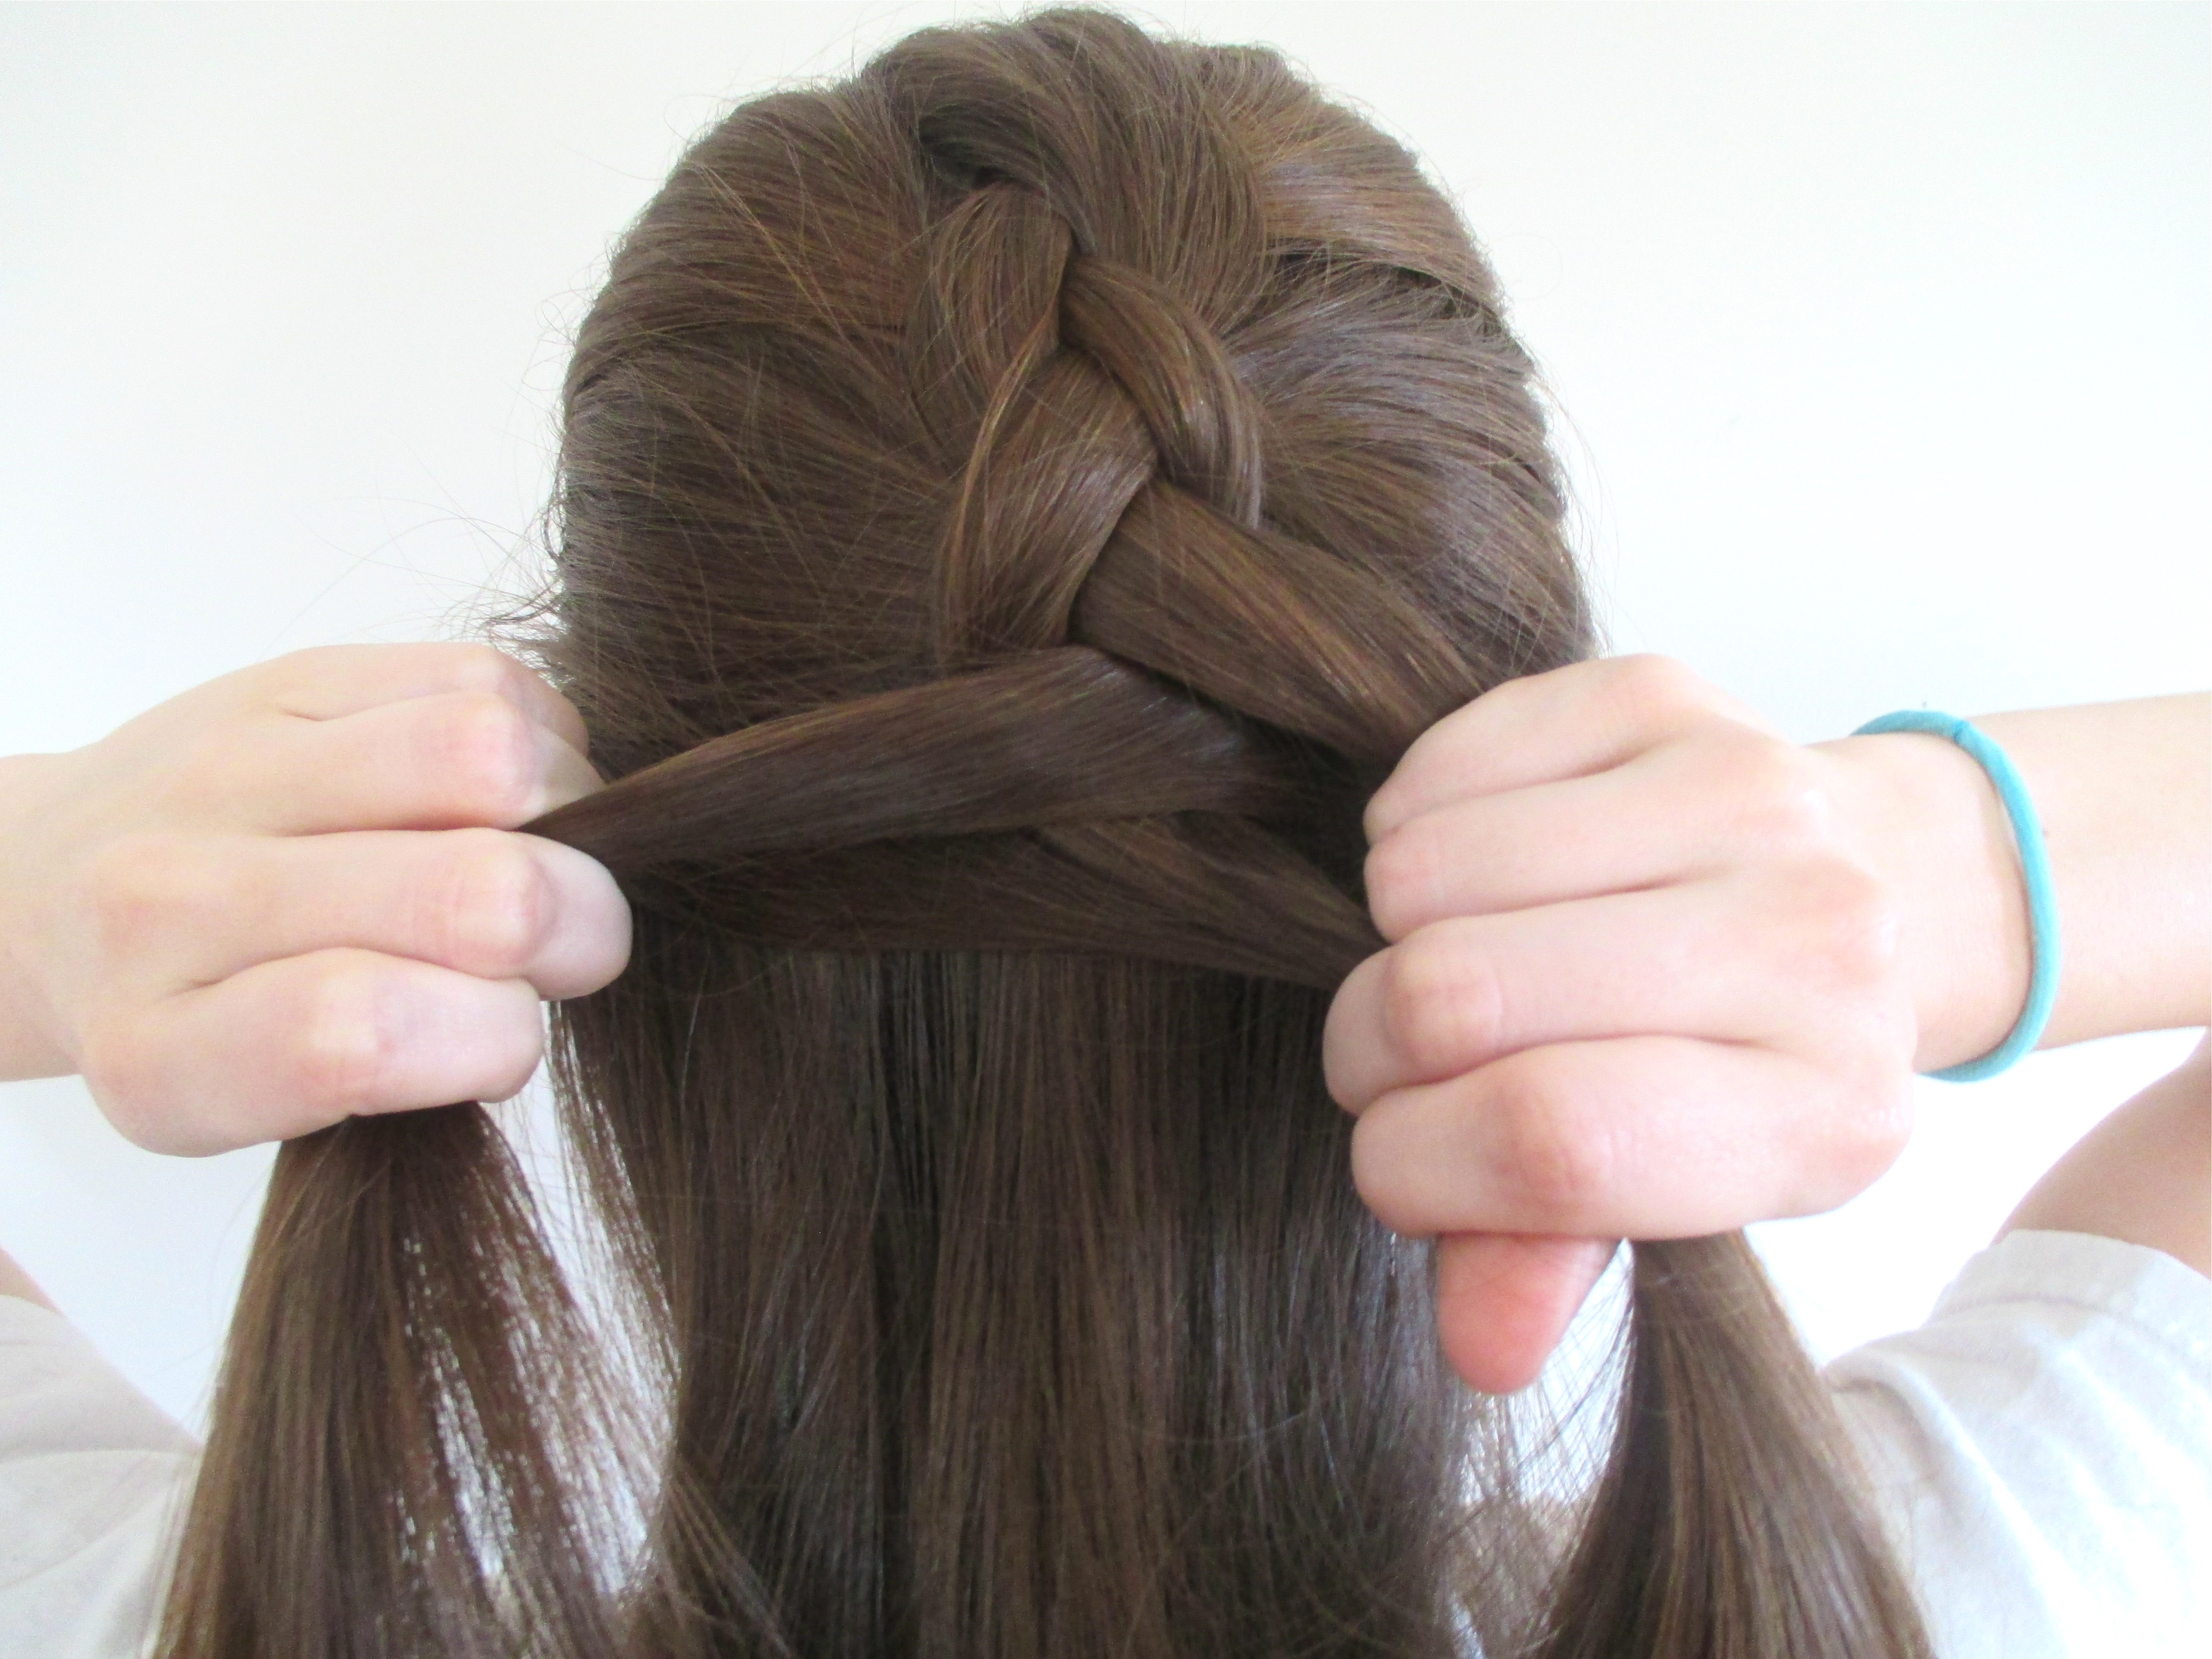 Braiding How To: French vs Reverse French Braids 